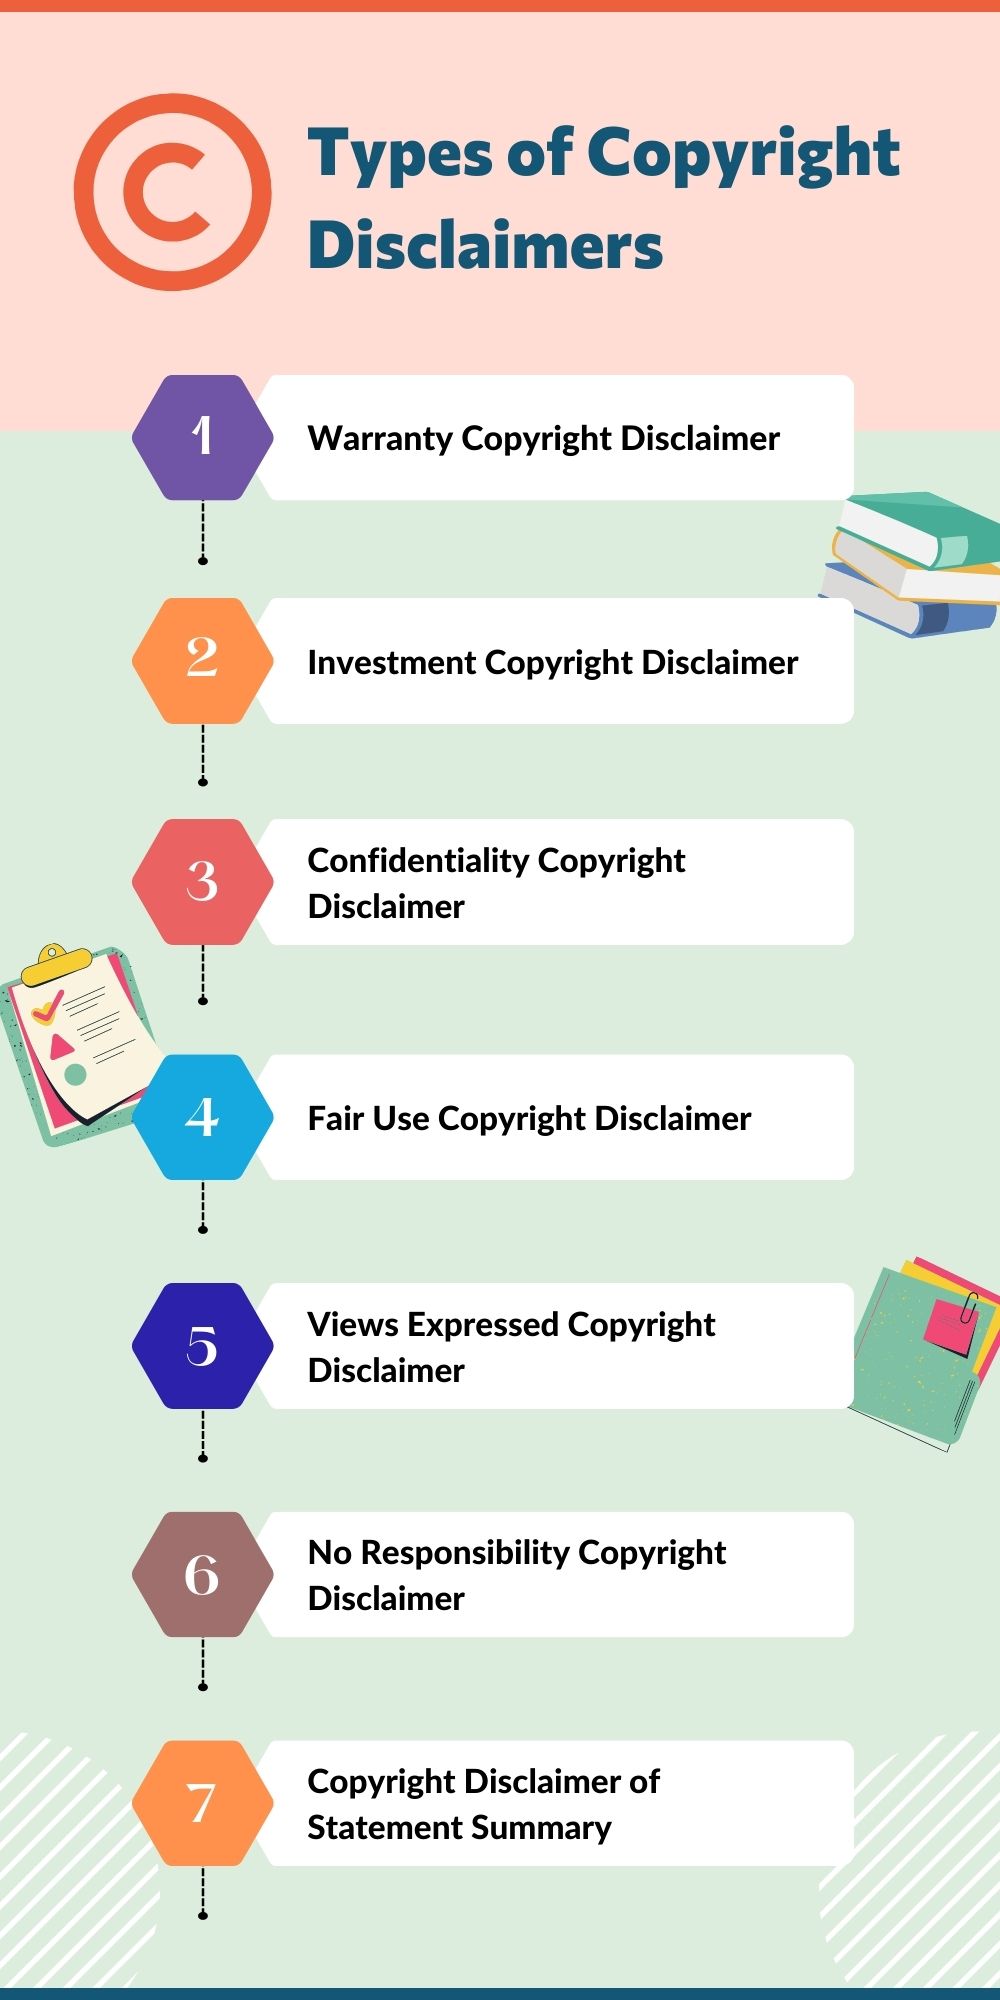 Types-of-Copyright-Disclaimers